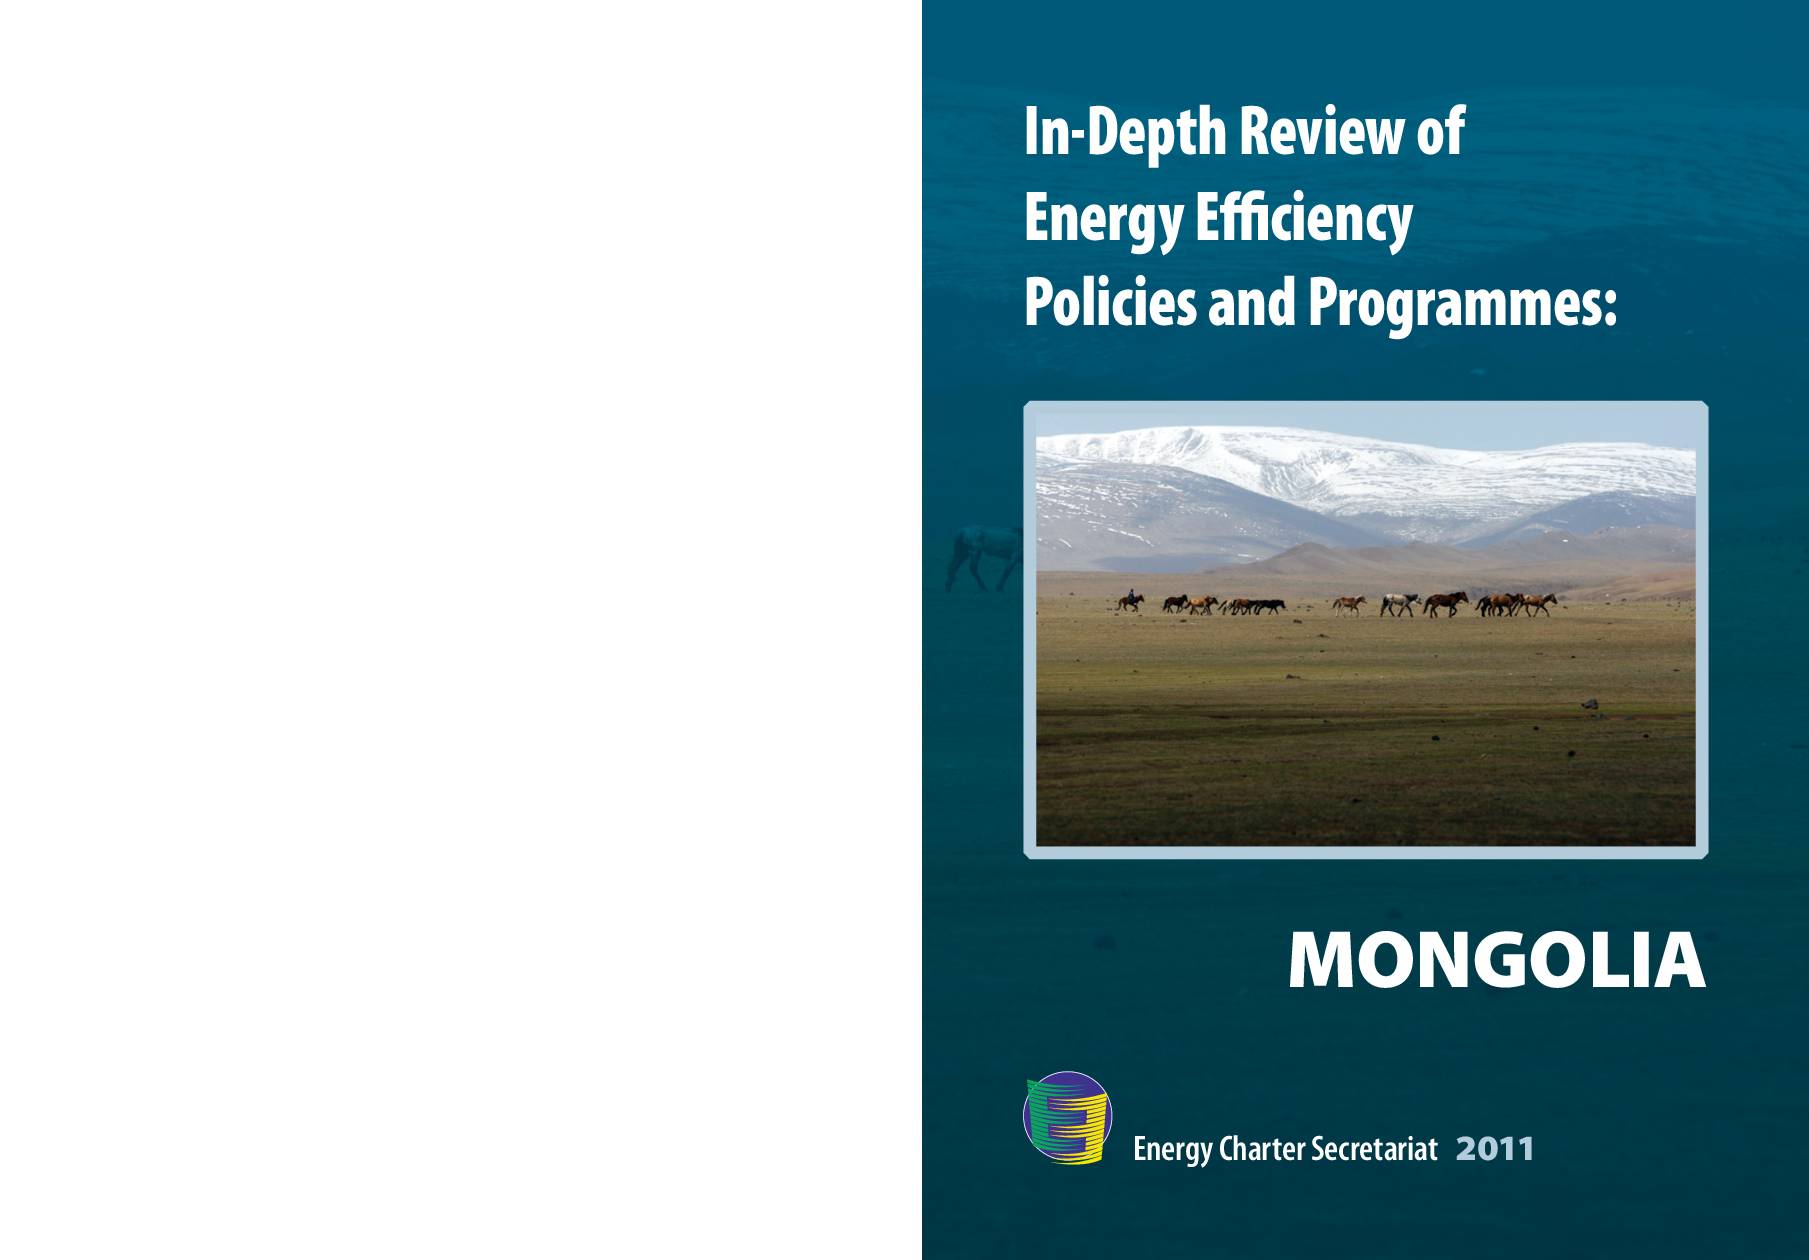 In-Depth Review of Energy Efficiency Policies and Programmes of Mongolia